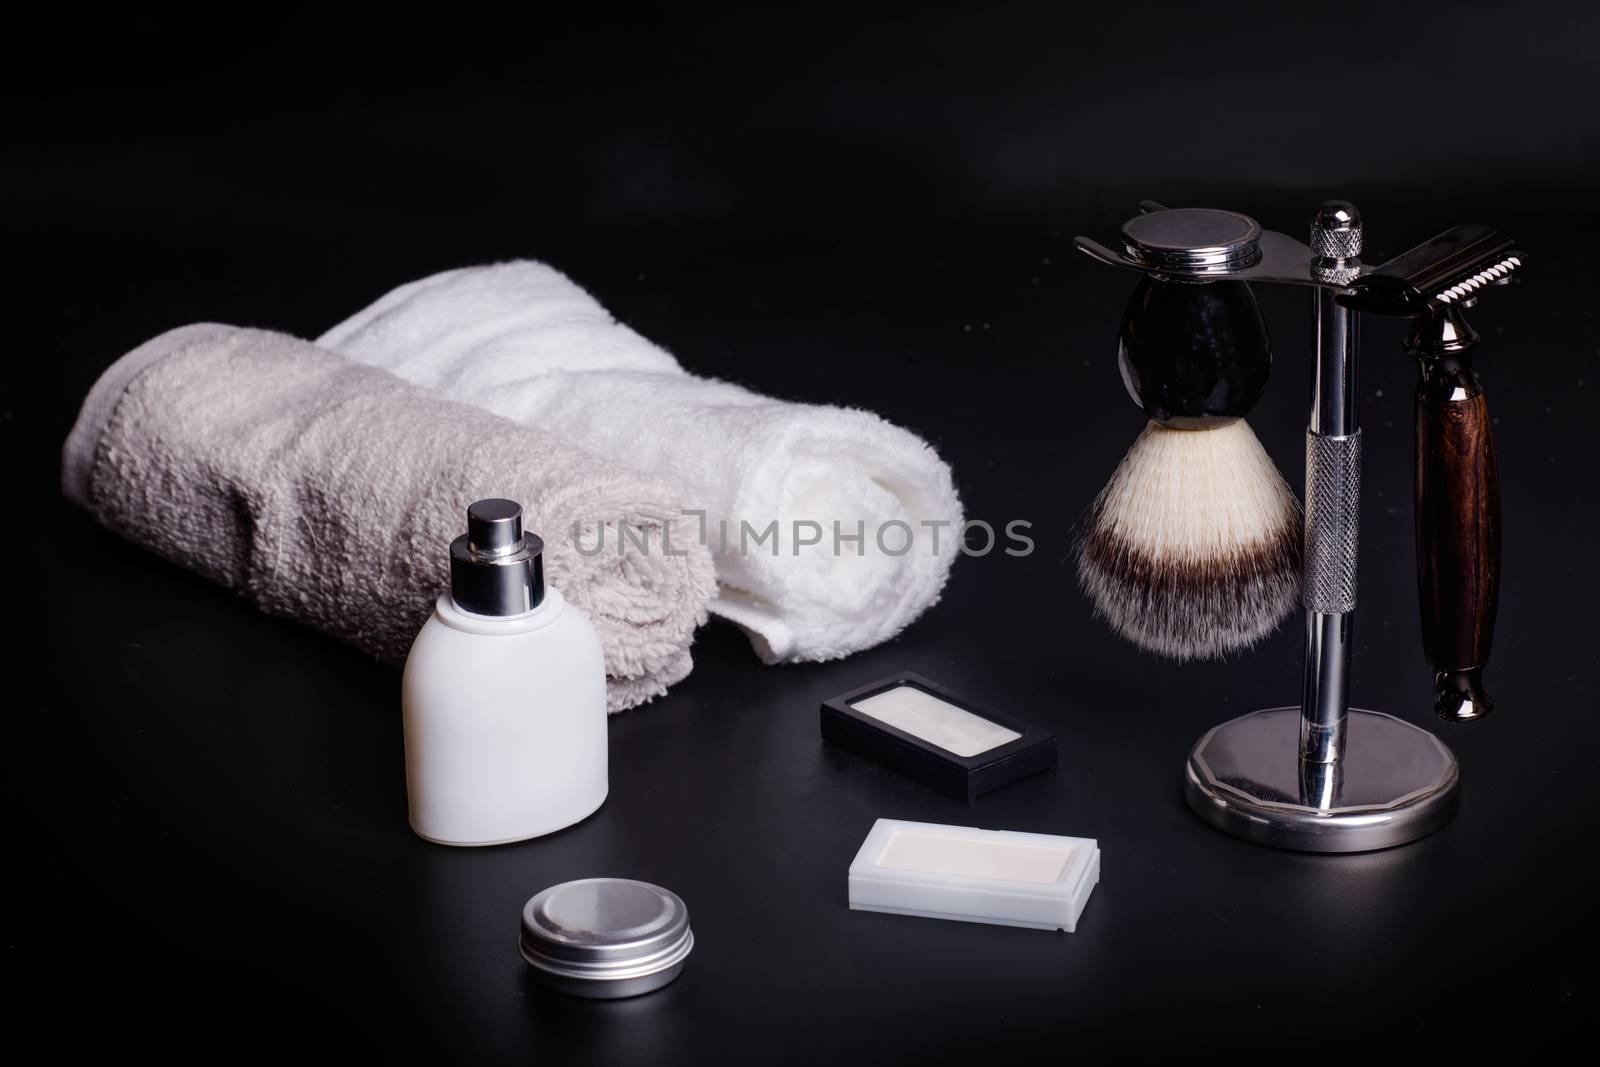 Razor and brush on stand, towels, perfume, balsam and blades on a black background.